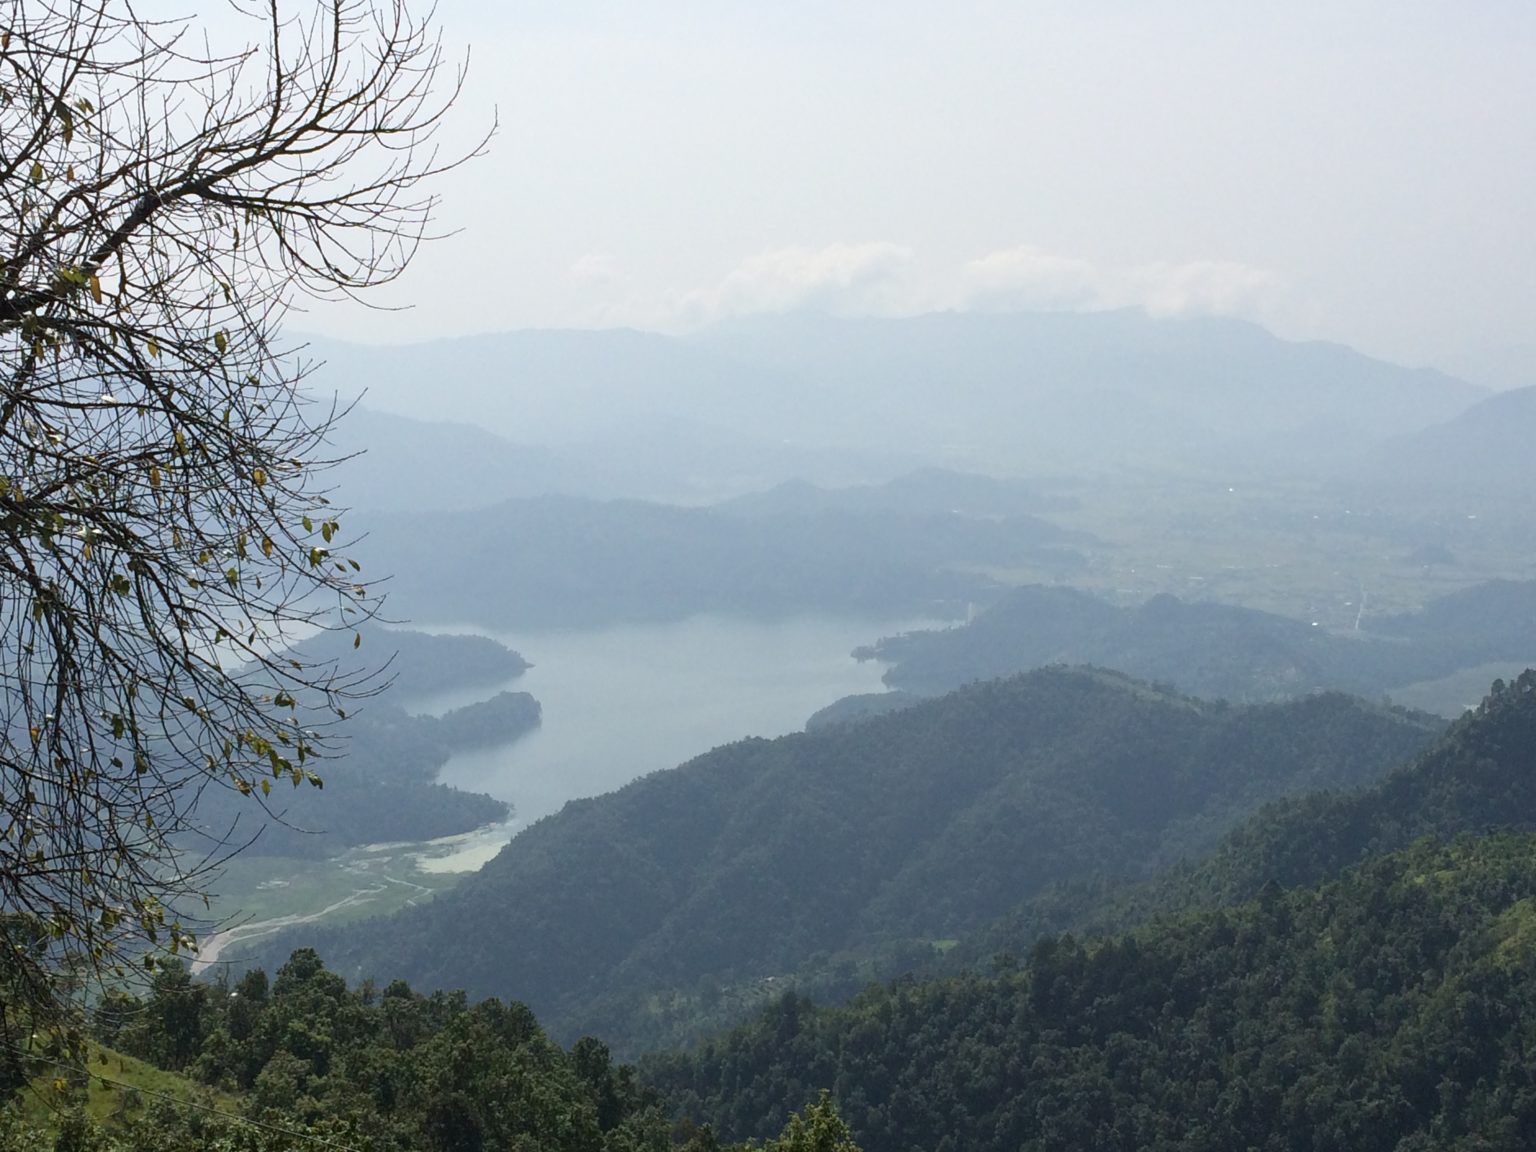 Phewa Lake from atop a hill with mountains in the distance, Pokhara Nepal